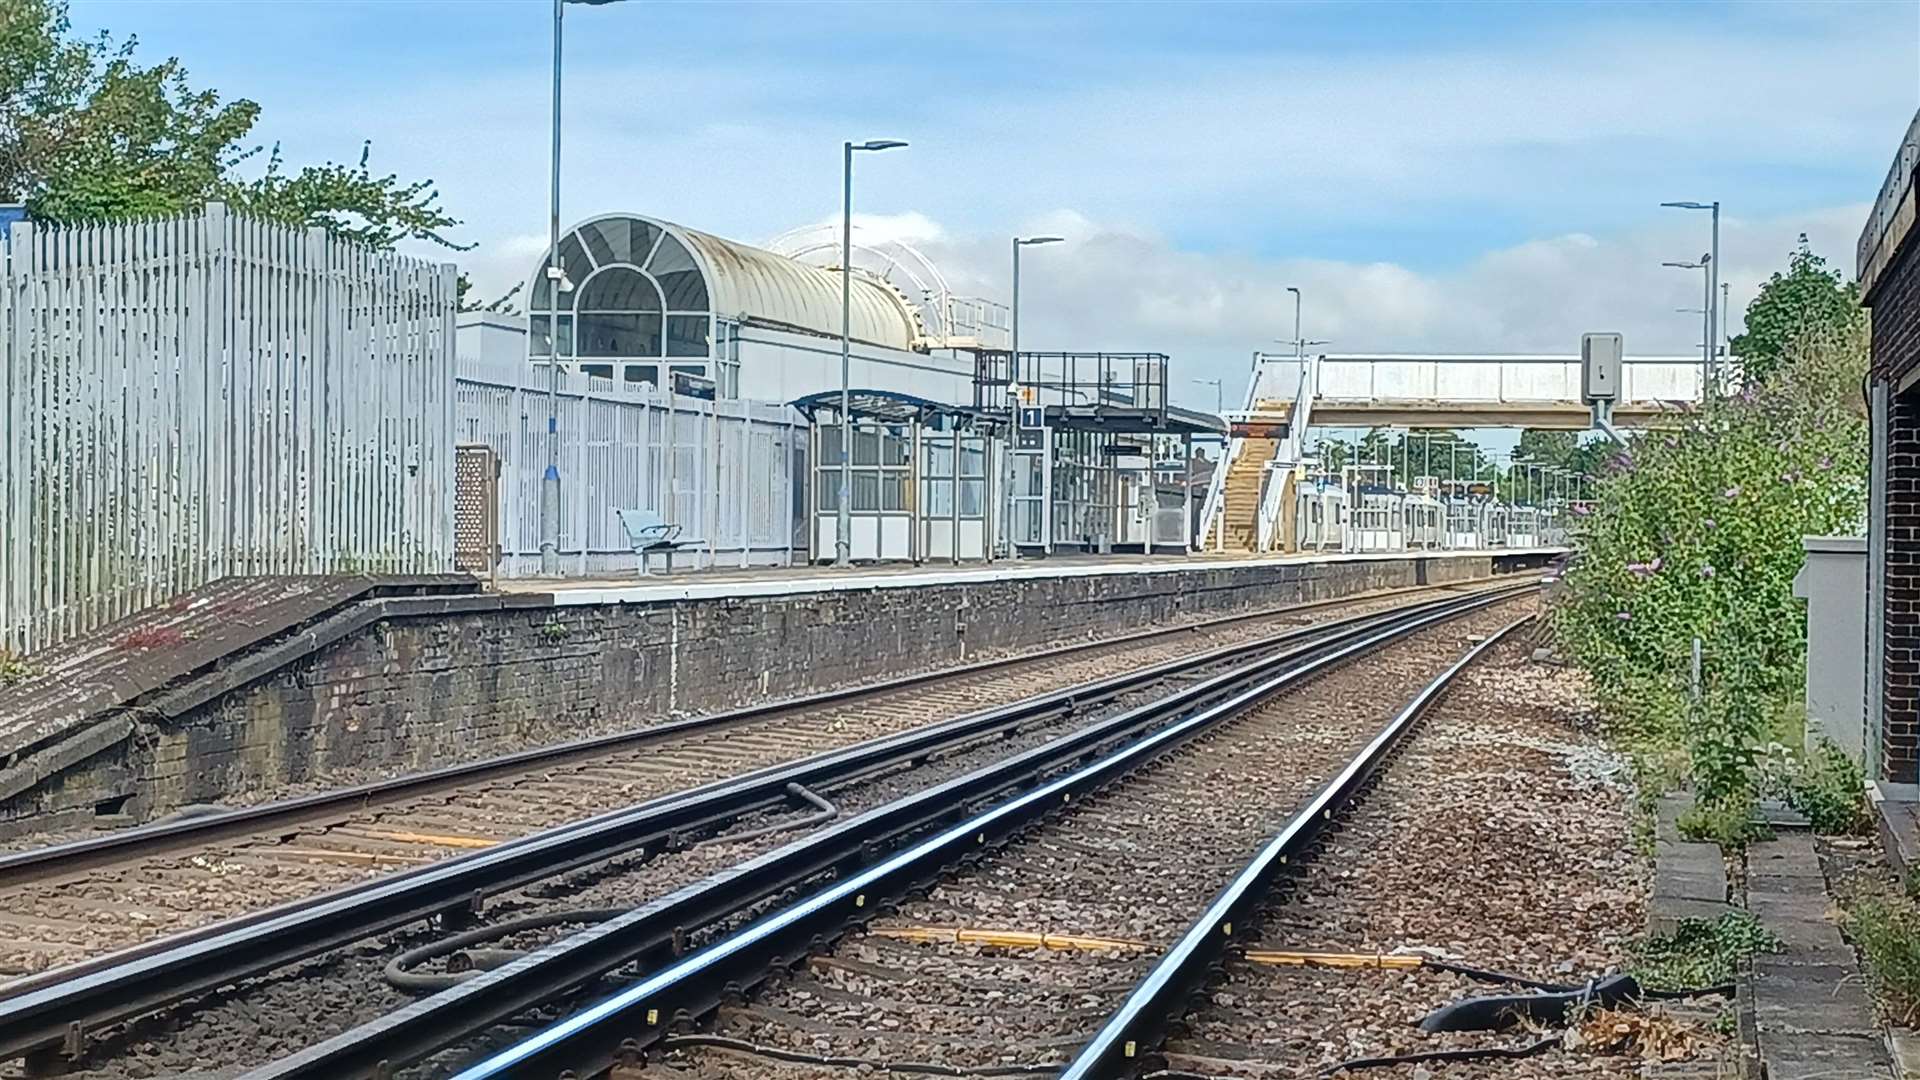 There will be very few trains running on Saturday, October 2